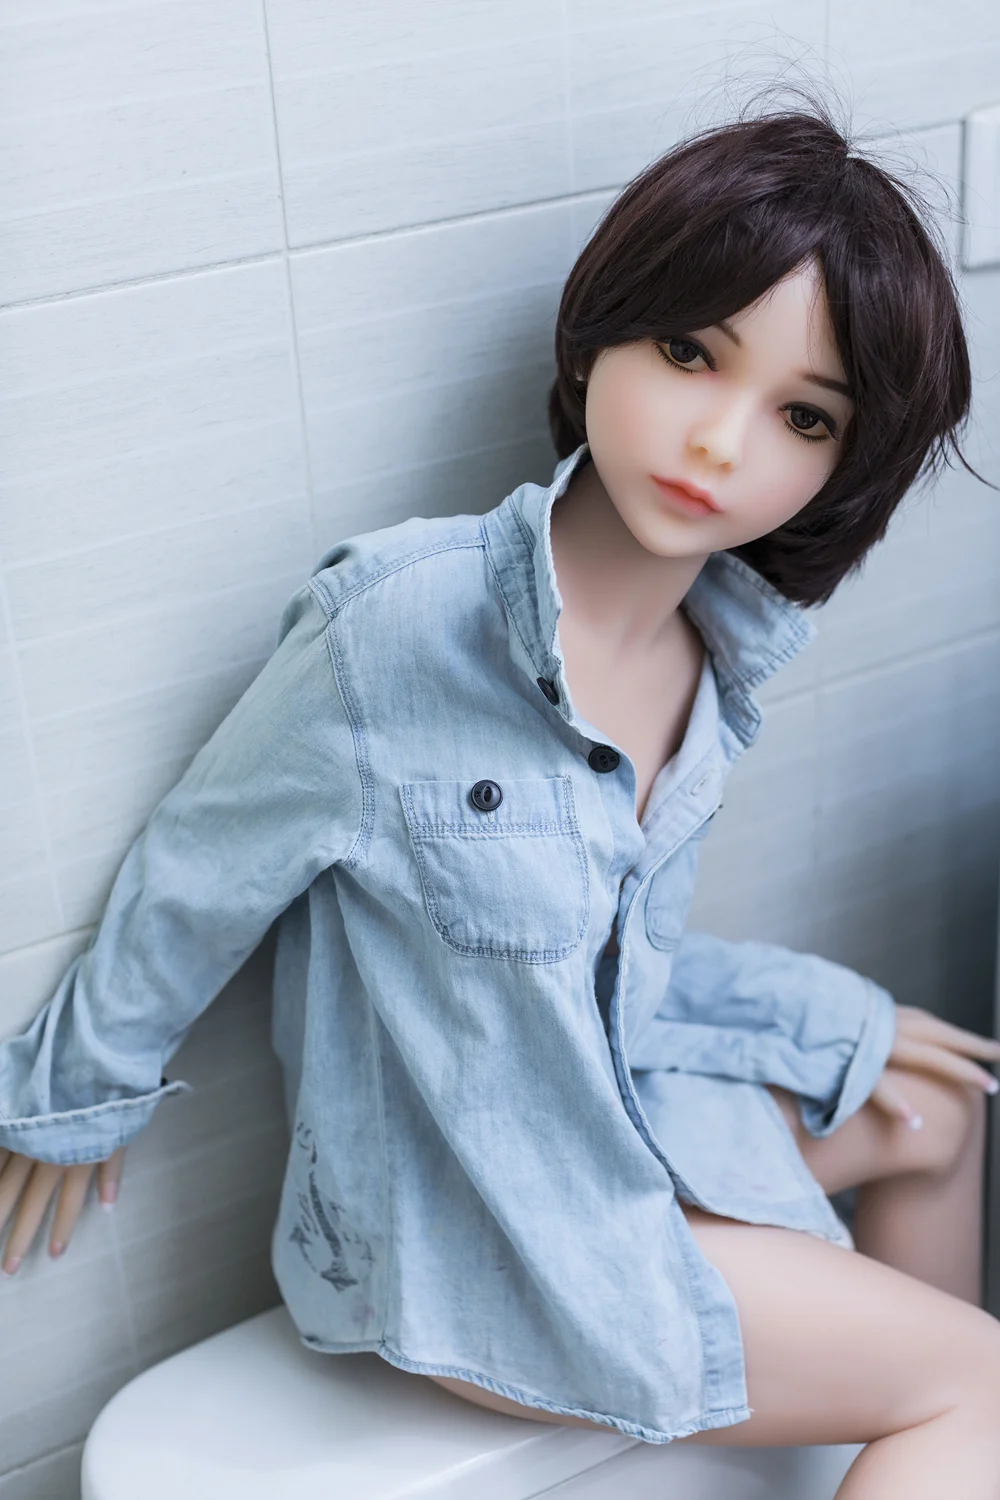 Small boobs sex doll with short hair